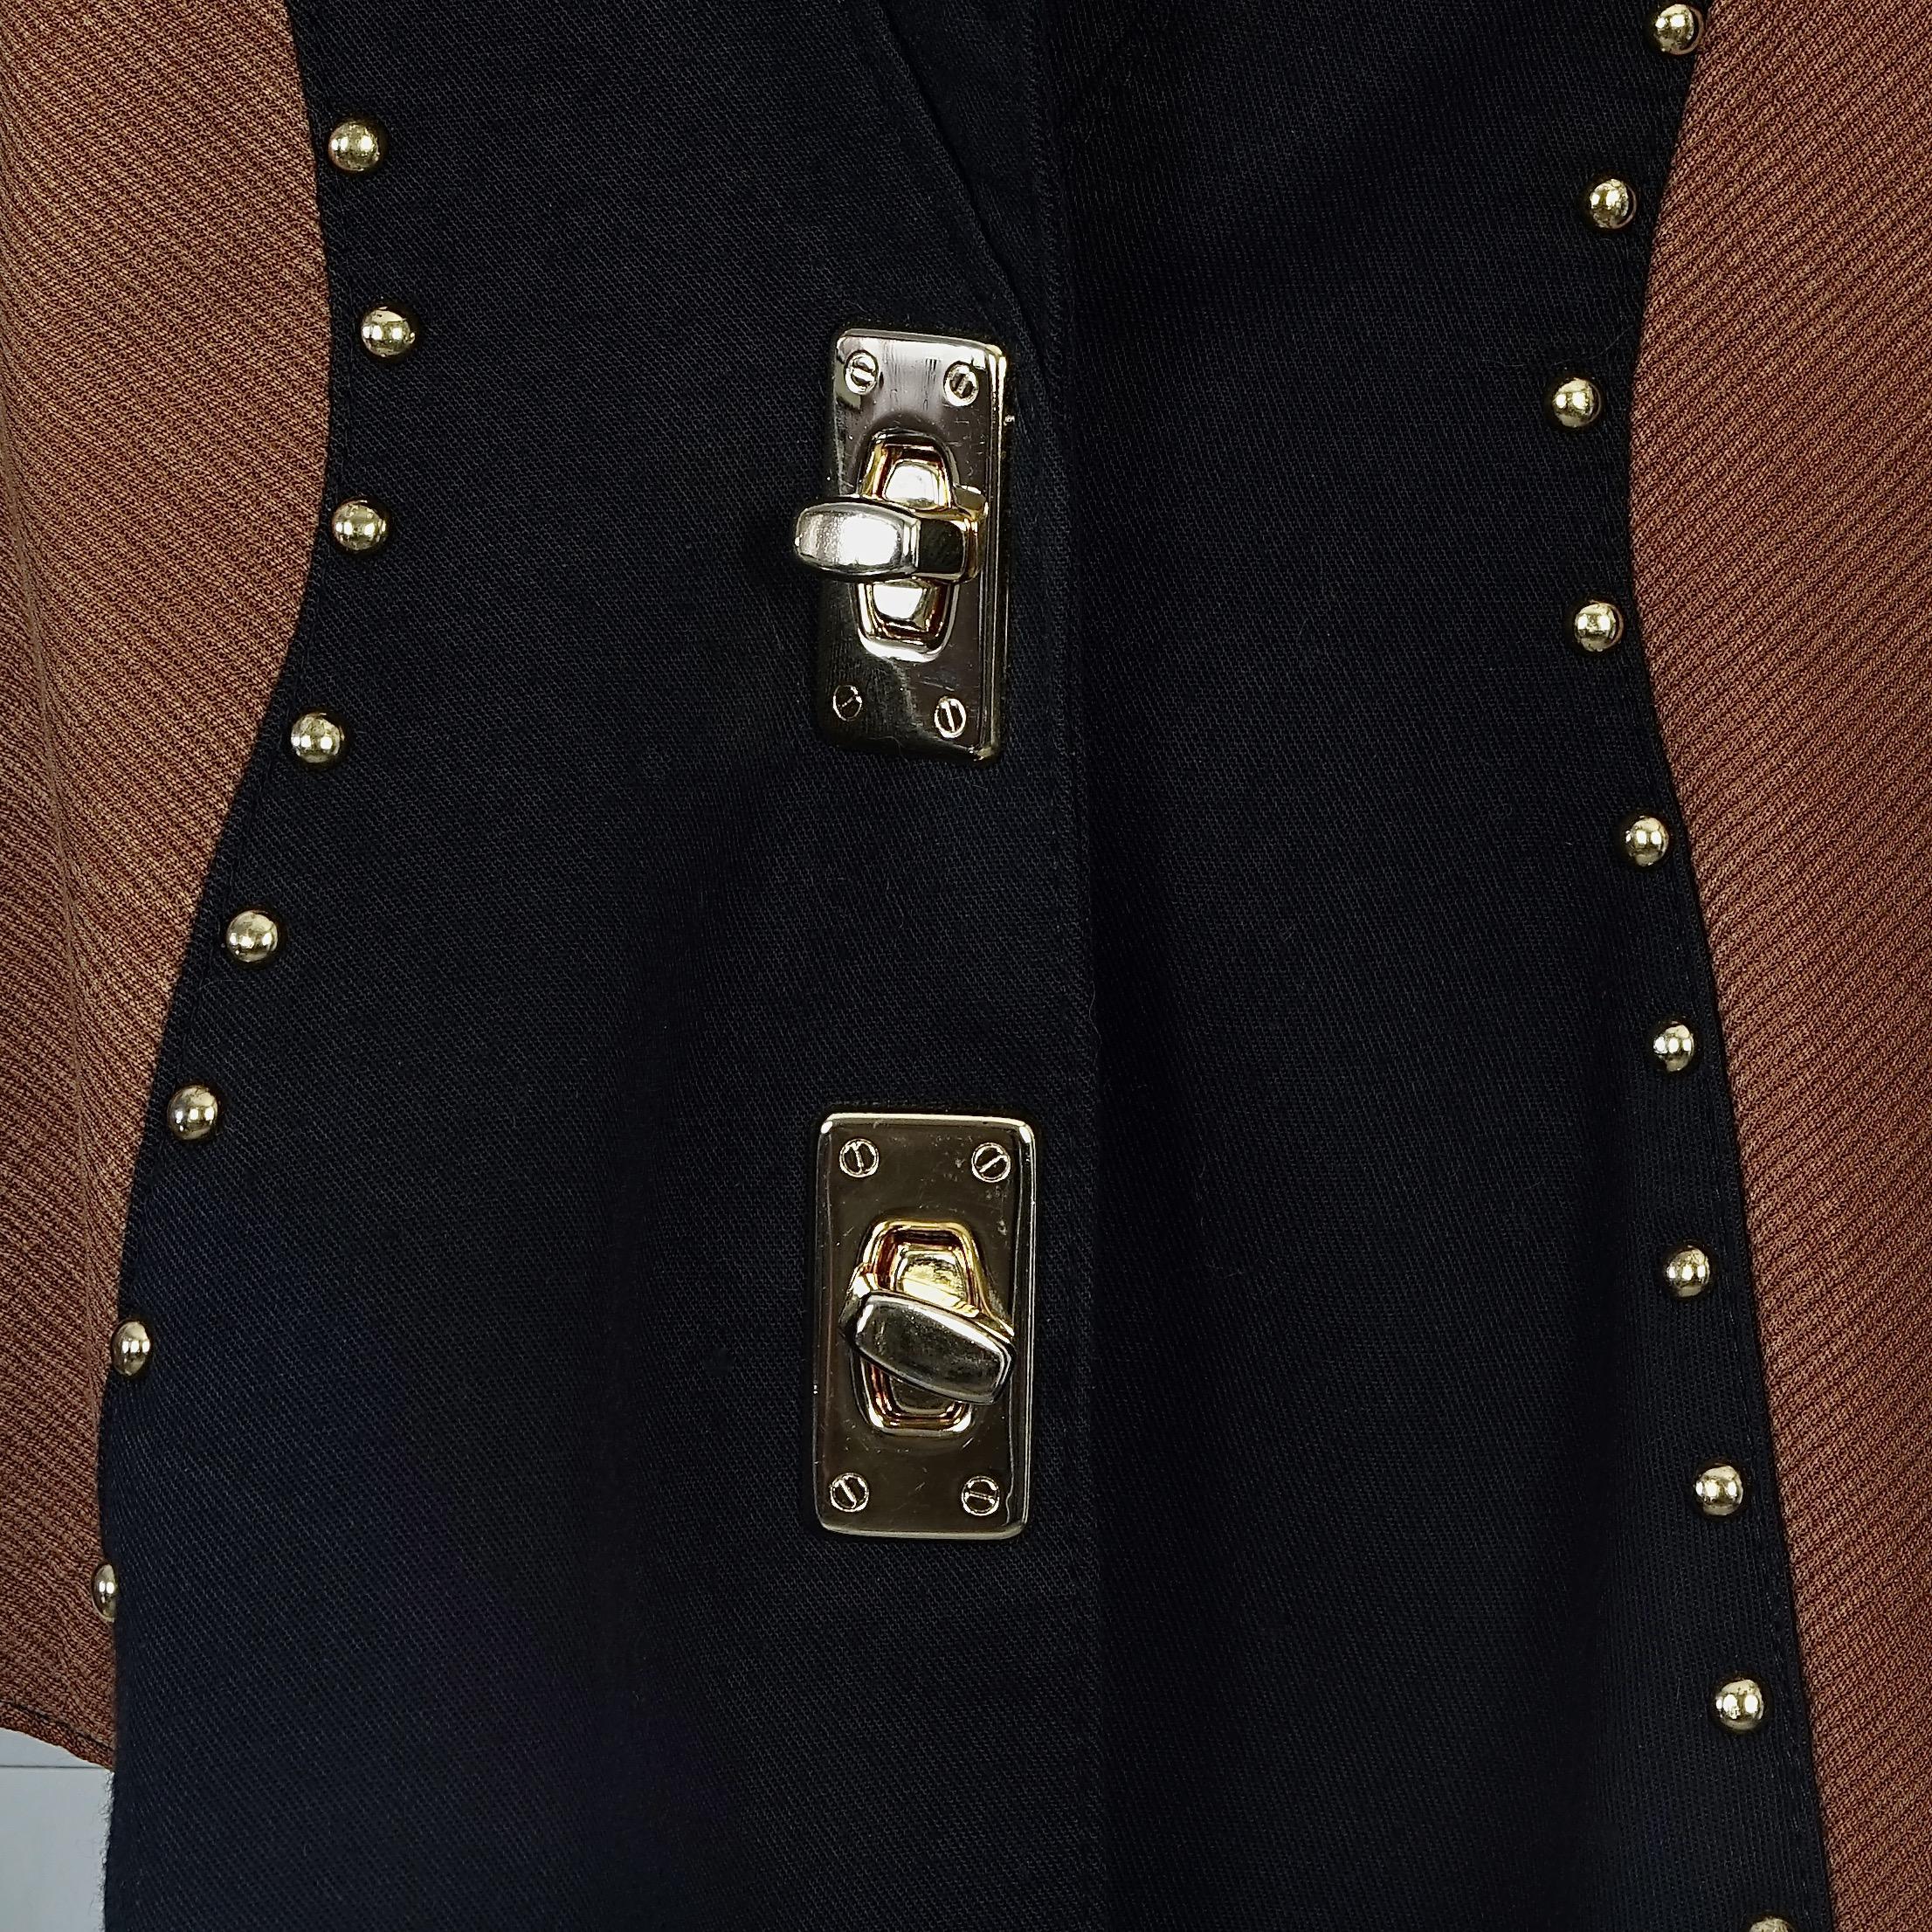 Women's Vintage CHRISTIAN LACROIX Studs and Jeweled Buttons Contrast Jacket